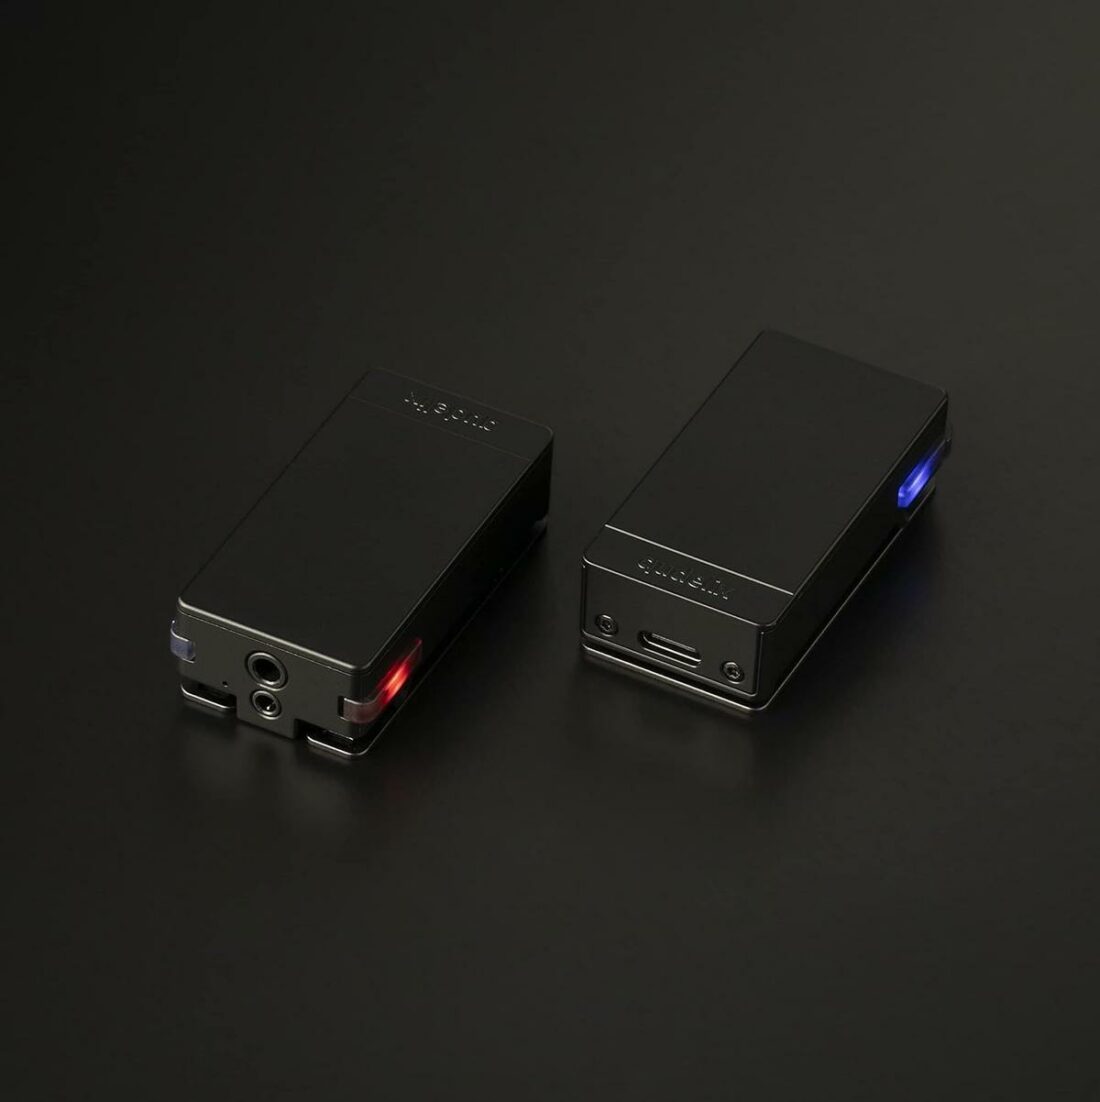 The Qudelix-5k DAC and amp. (From: Qudelix)